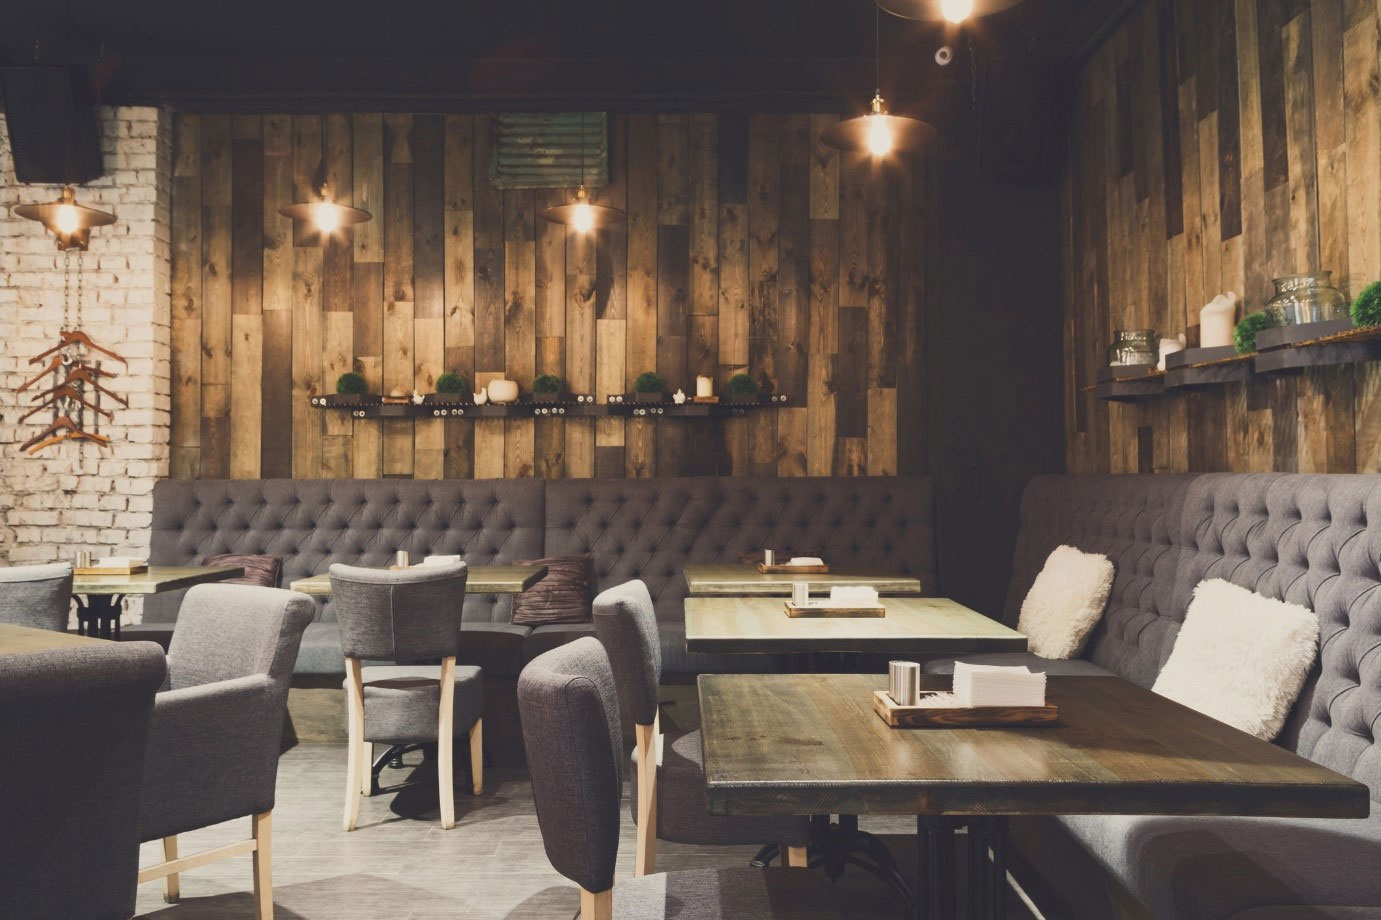 5 Restaurant Design Tips and Trends